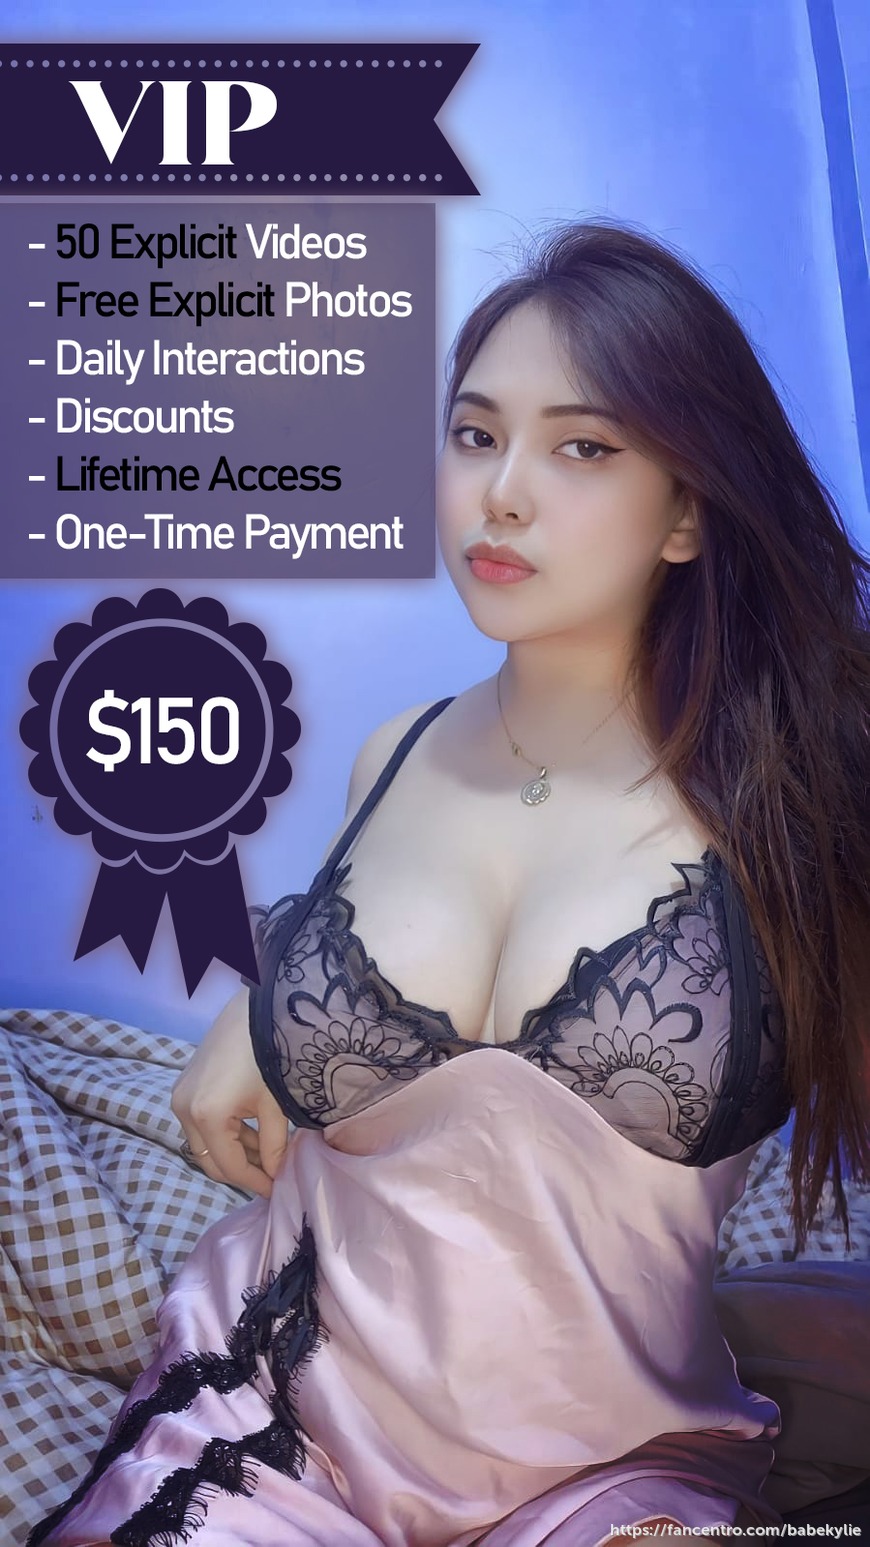 I just wanted to remind you how amazing my VIP plan is going to be. With 50 explicit videos, daily interactions, free photos and discounts on future purchases - we're both in for a wild ride!